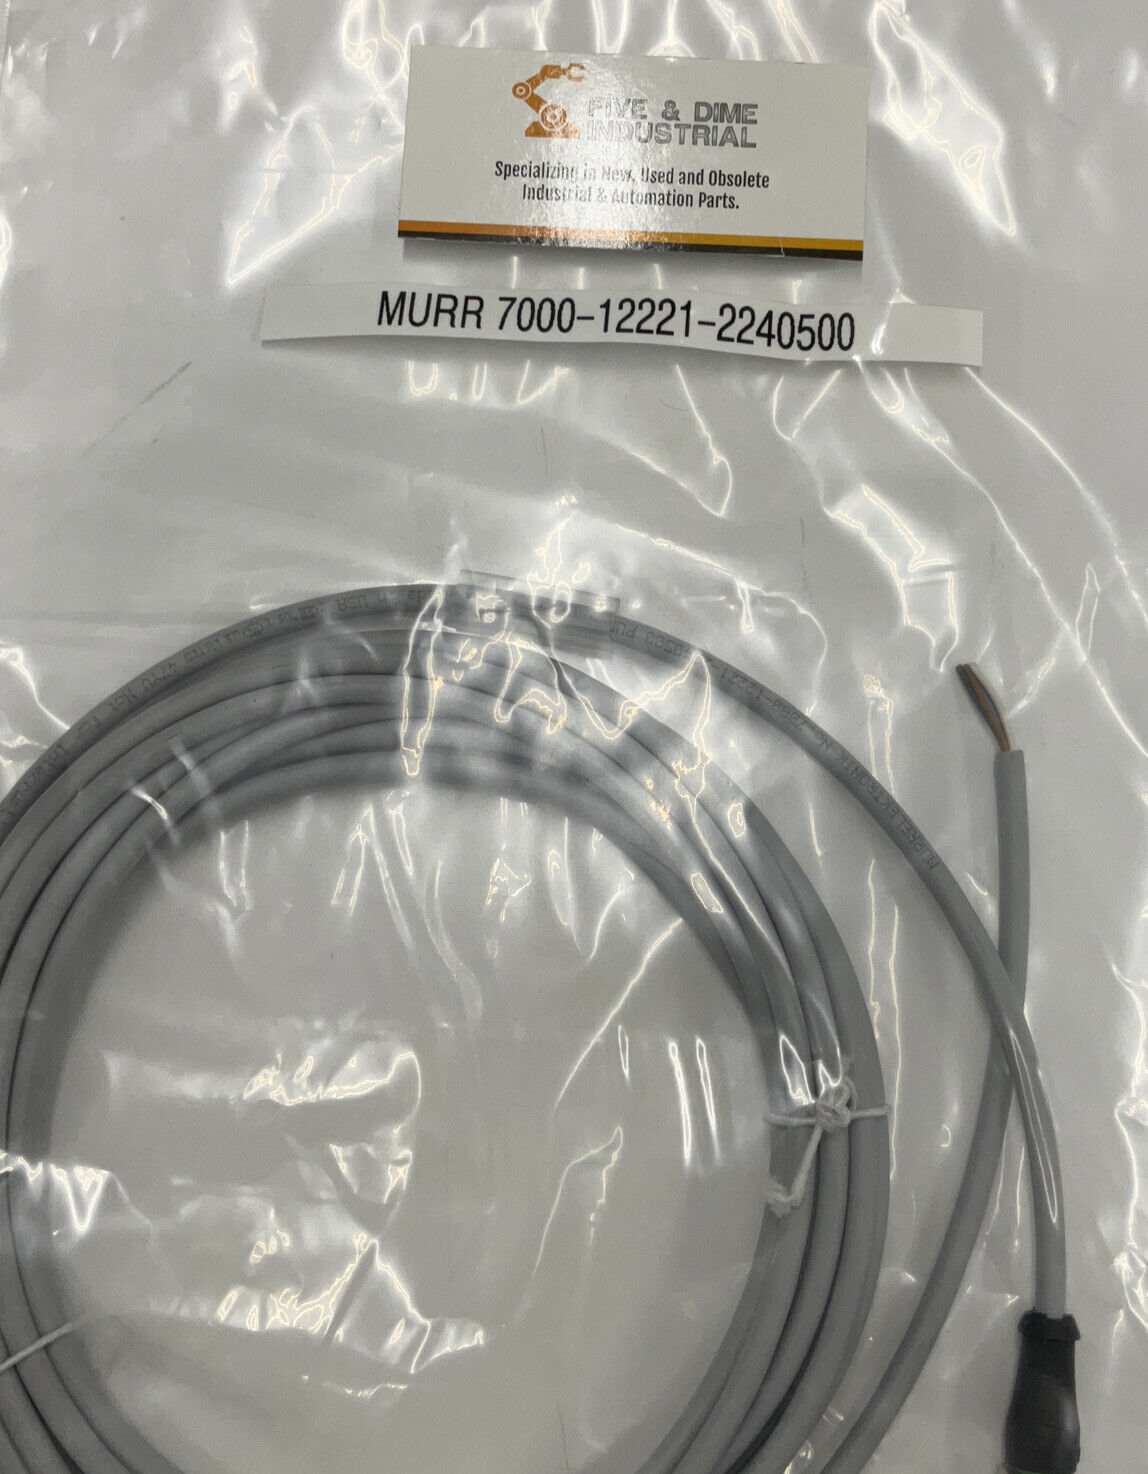 MURR 7000-12221-2240500 M12 5-Pin Female Straight w/ Cable 5 Meters (CBL131)